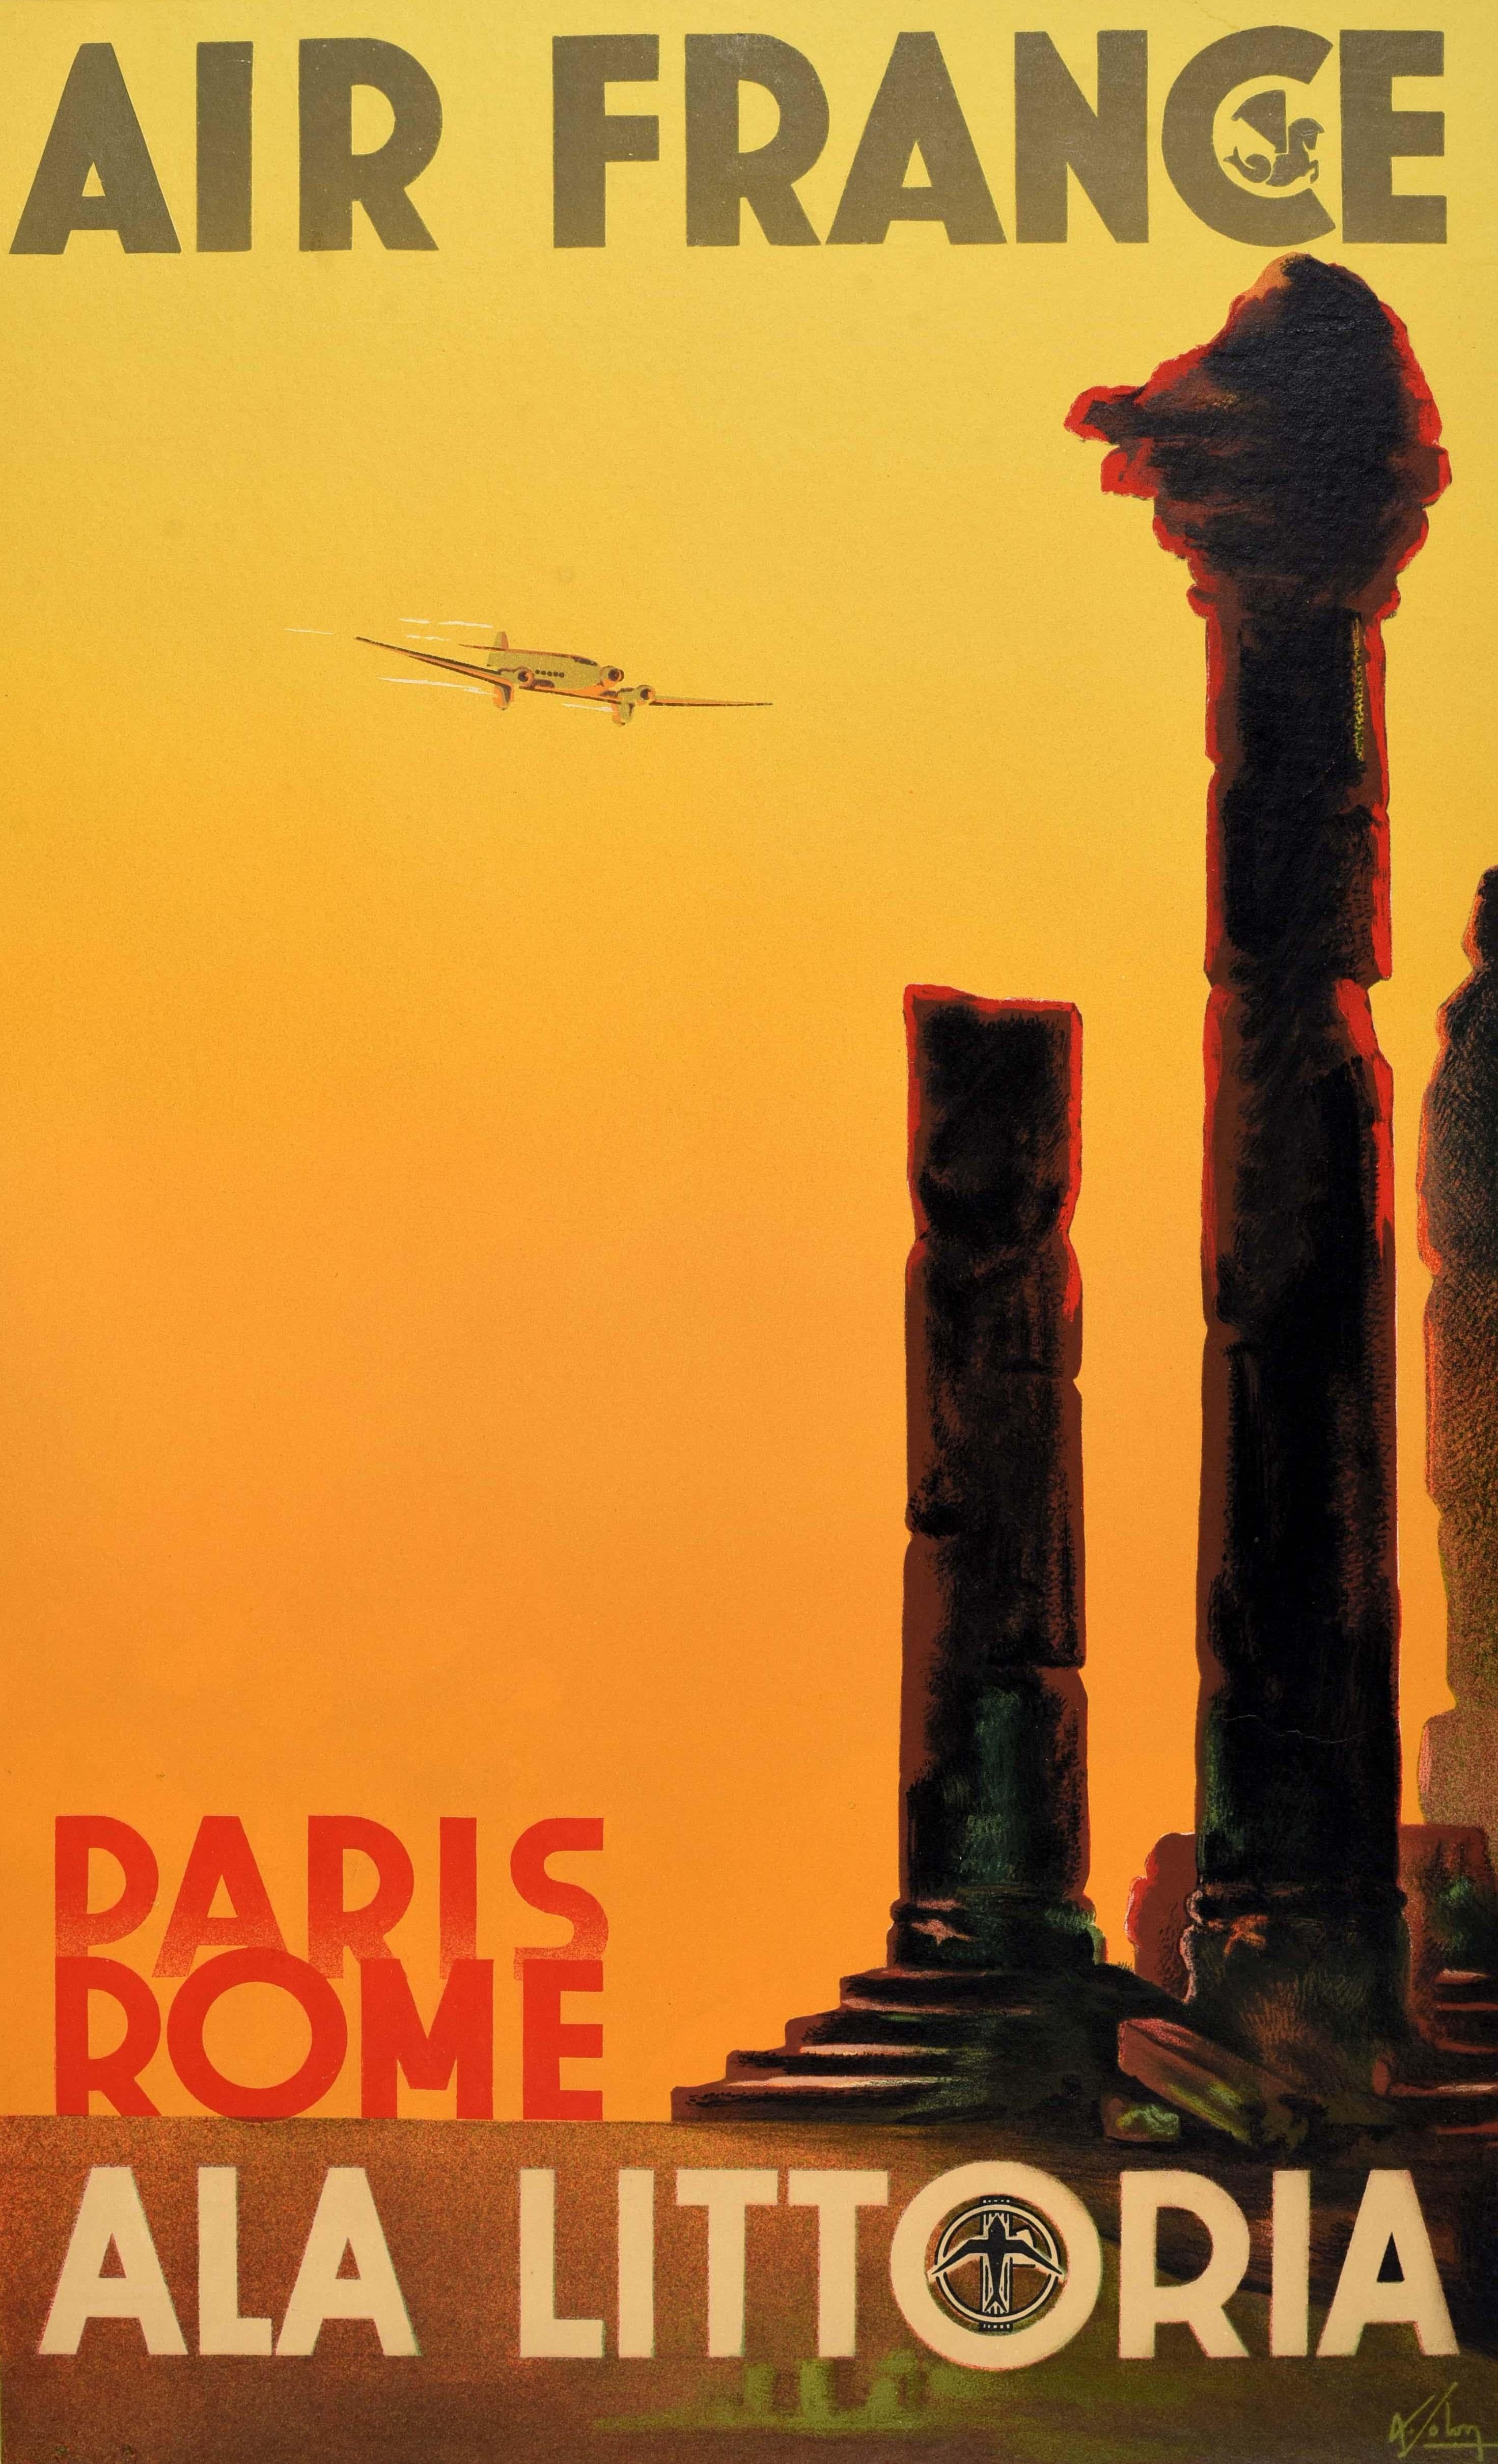 Original vintage travel poster for Air France Paris Rome Ala Littoria featuring a stunning design by Albert Solon (1897-1973) depicting ancient stone pillars standing tall against the orange shaded sky background, a plane flying at speed overhead